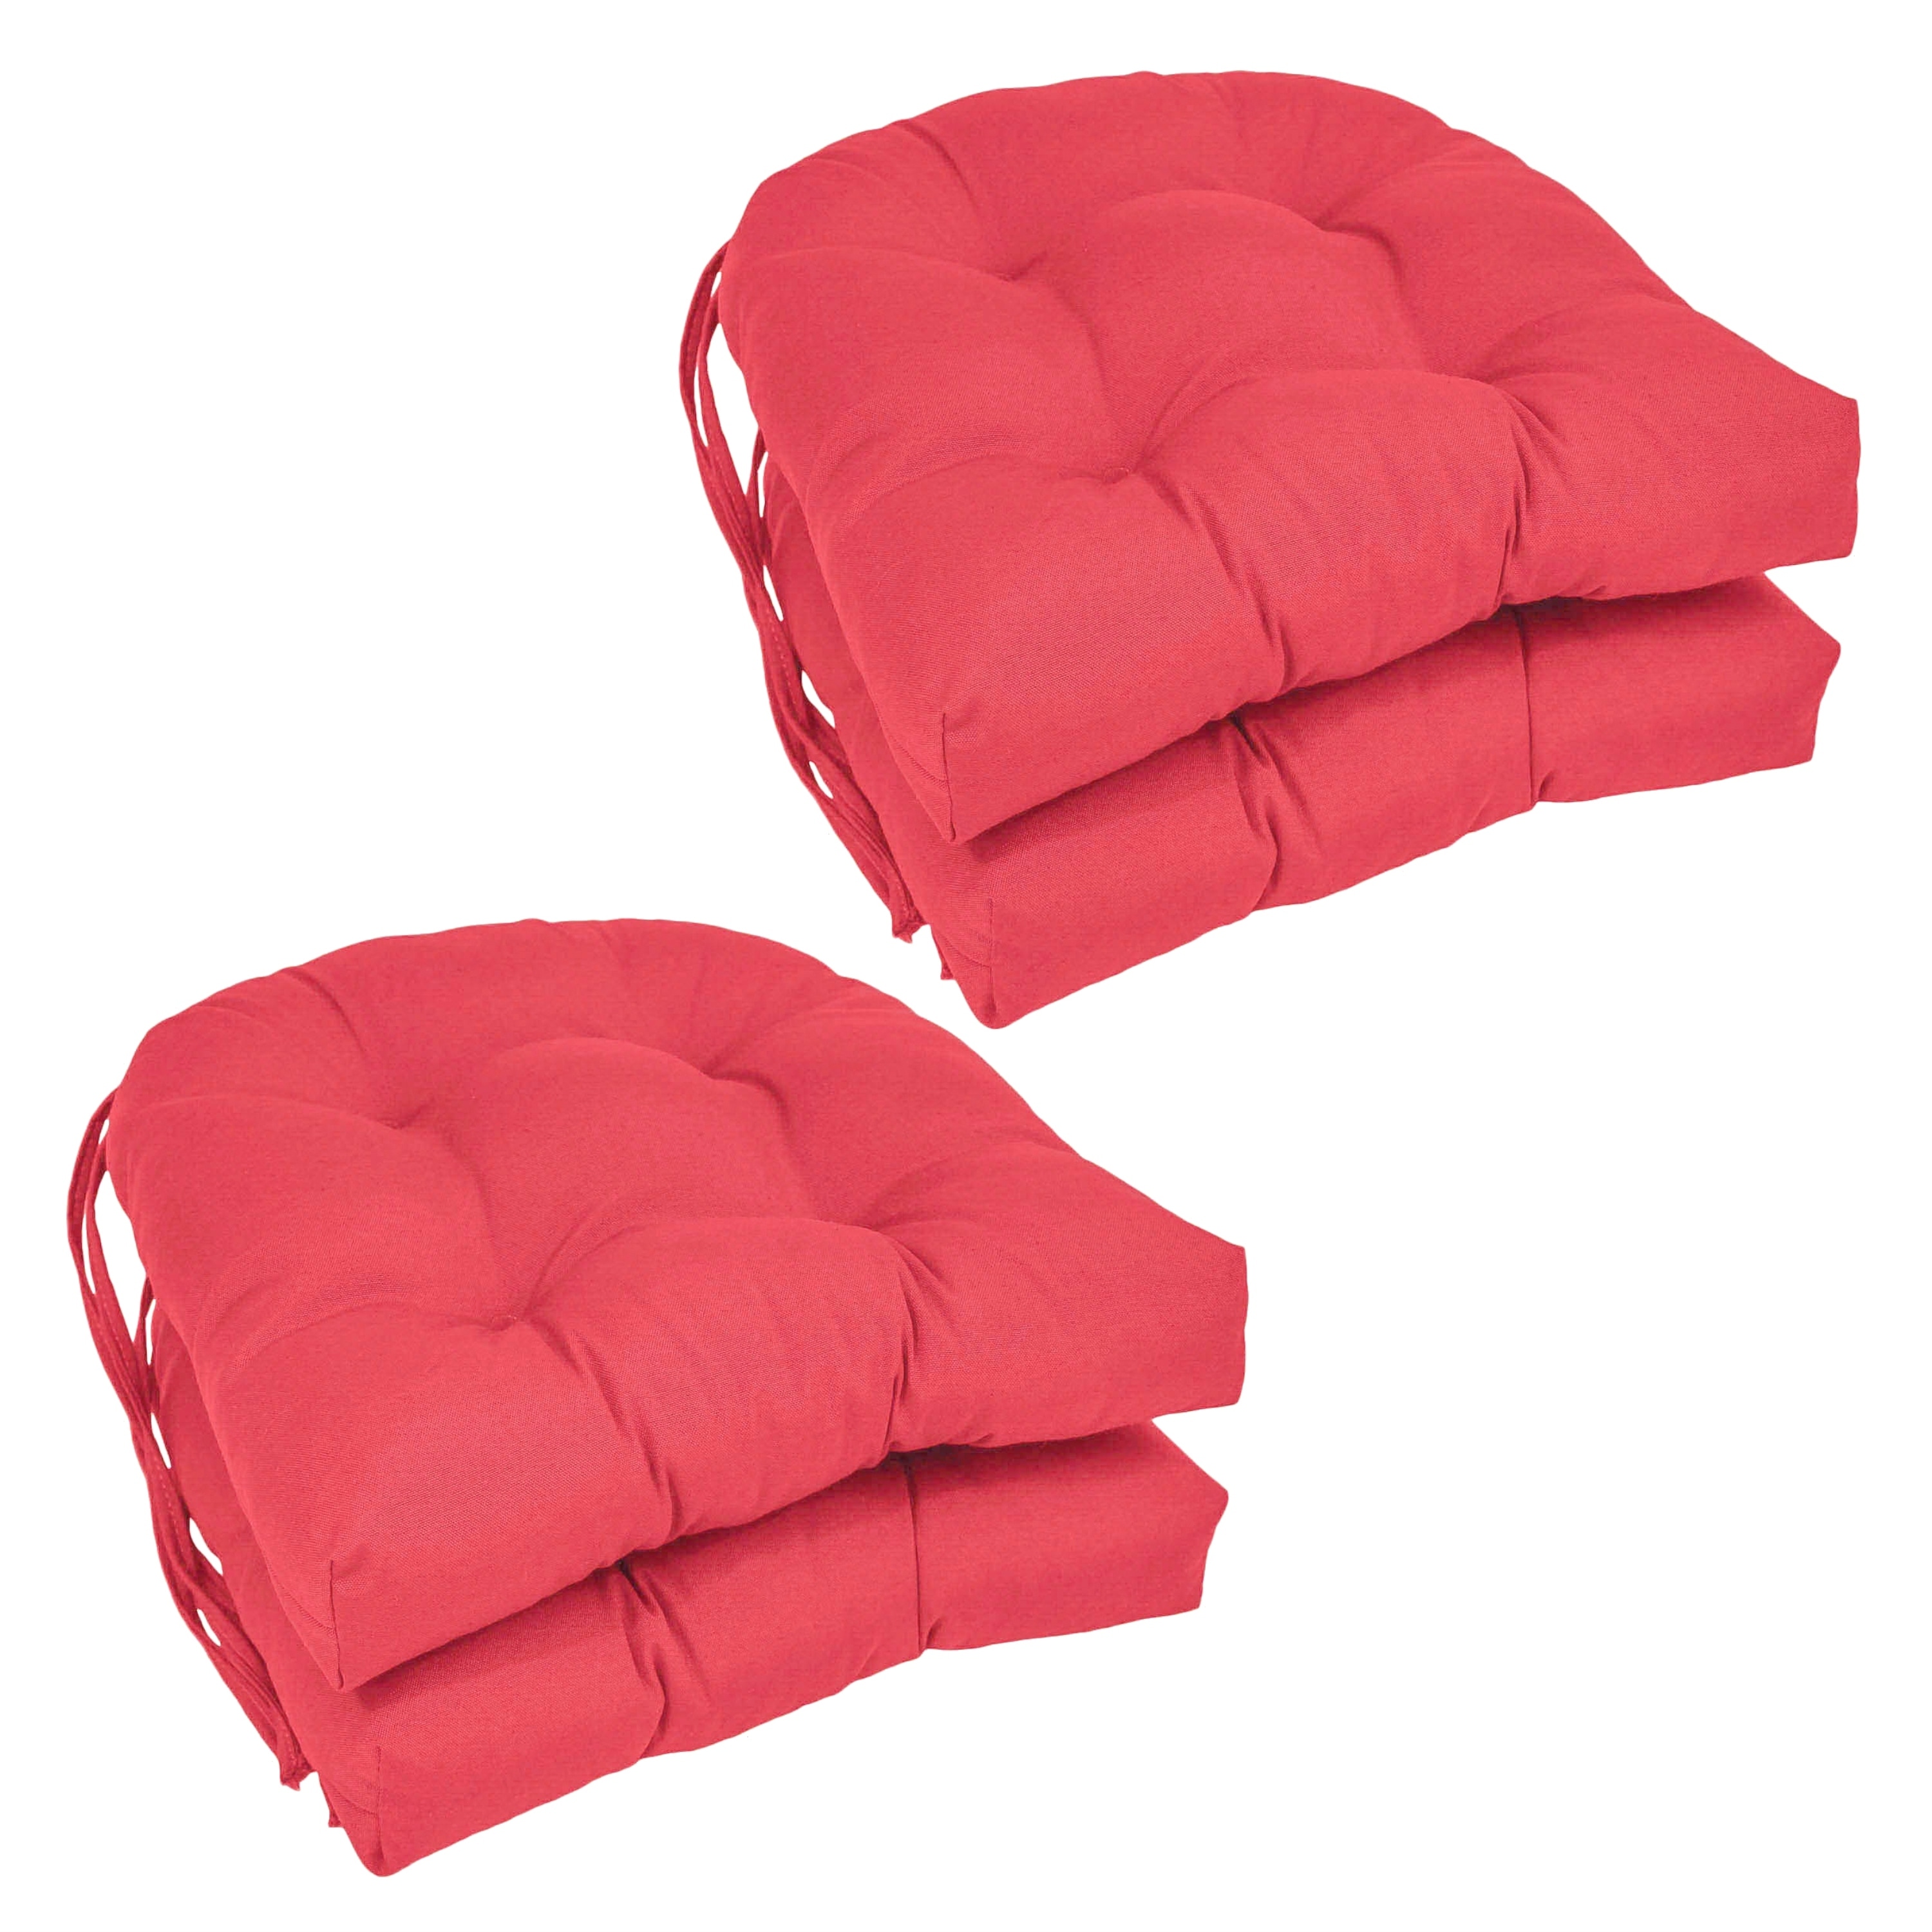 https://ak1.ostkcdn.com/images/products/is/images/direct/1f2ad5d8d4850220e4ed2cc22365ba05e14af834/16-inch-U-Shaped-Indoor-Chair-Cushions-%28Set-of-2%2C-4%2C-or-6%29.jpg